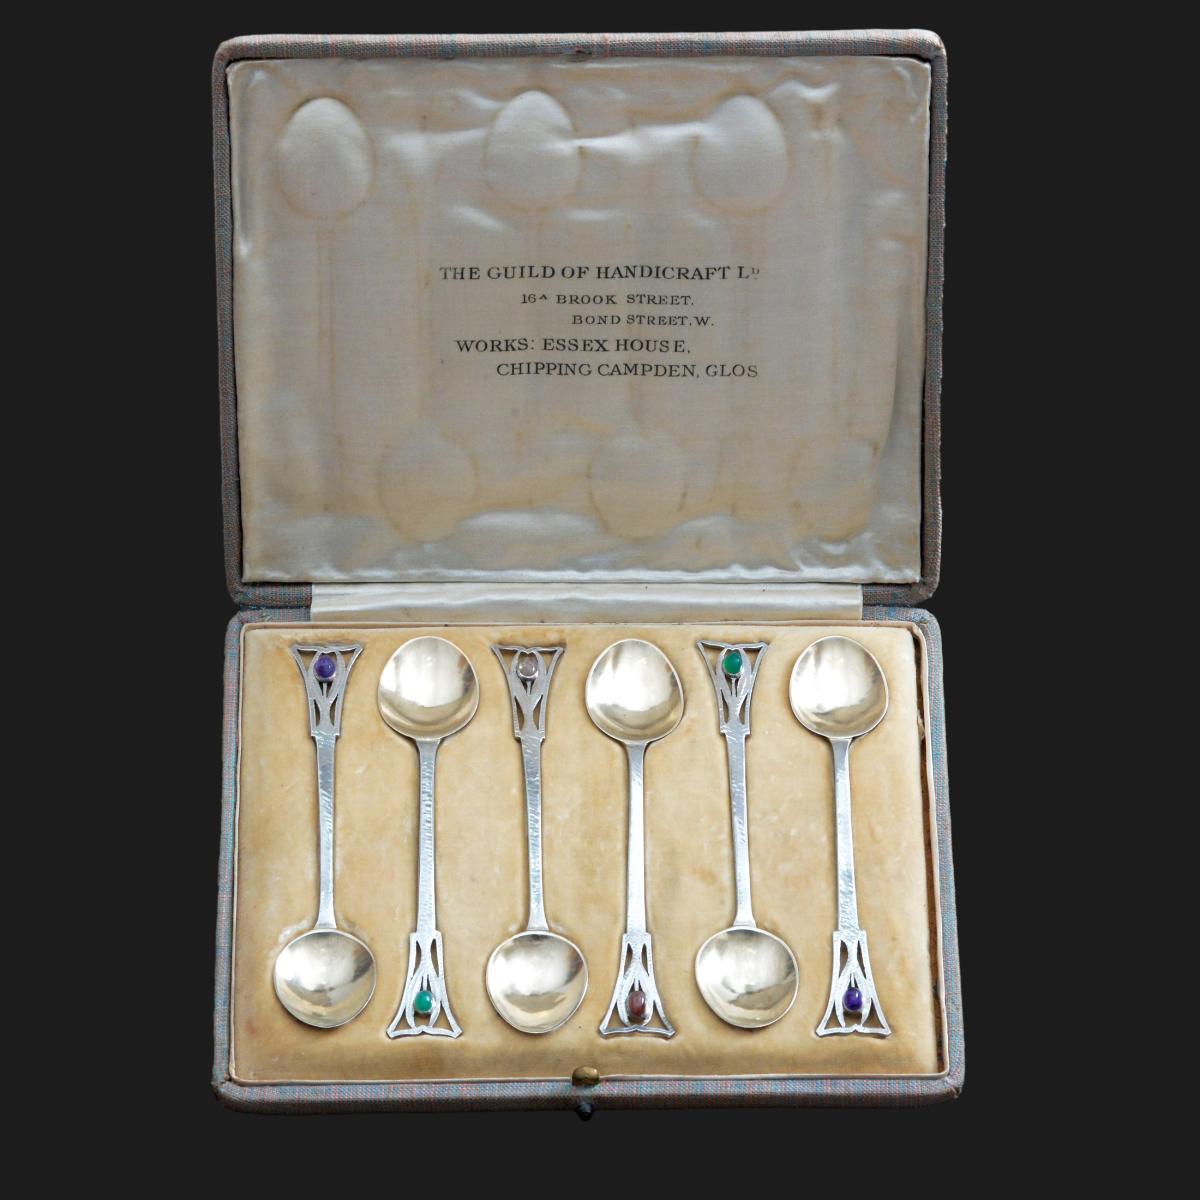 Guild of Handicraft silver spoons by Charles Ashbee